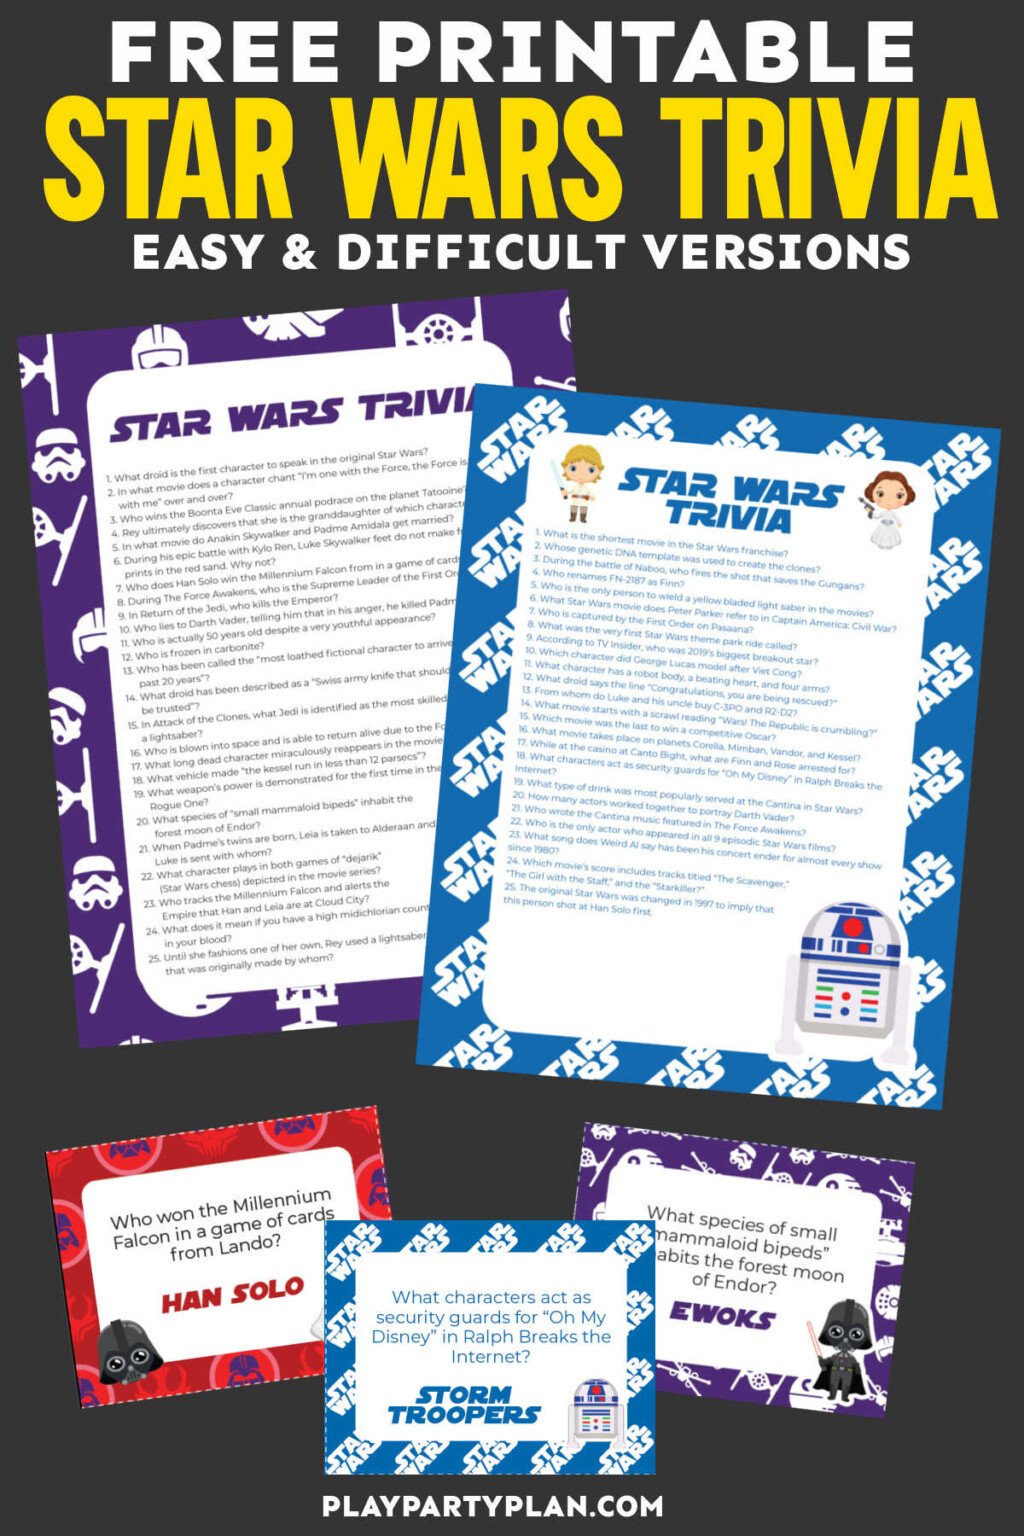 50+ Star Wars Trivia Questions & Printable Quiz Play Party Plan